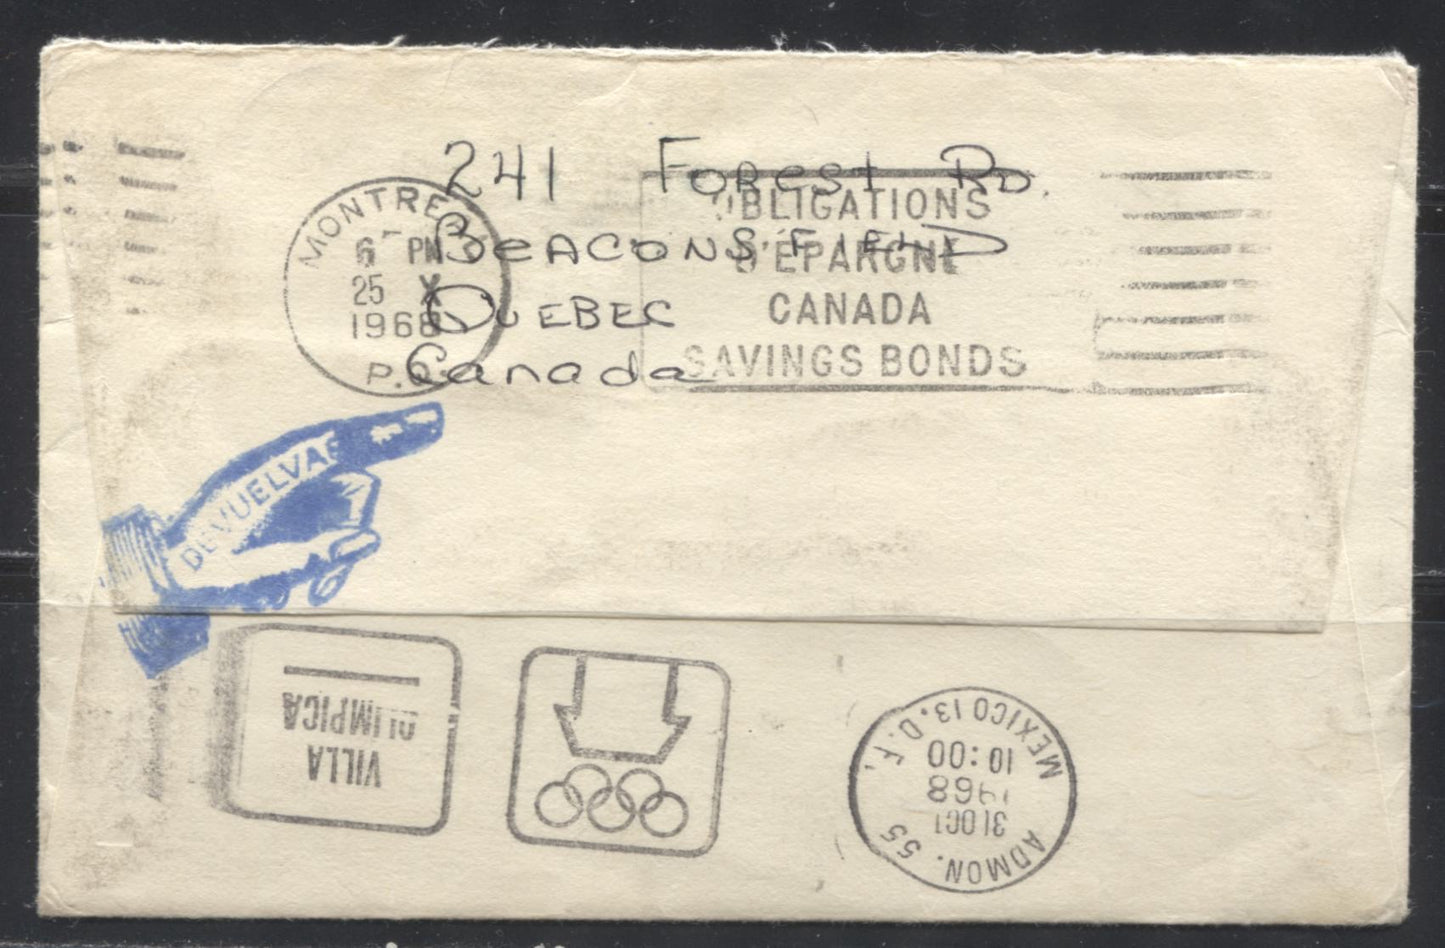 Lot 268 Canada #458d 5c Deep Blue Atlantic Fishing Village, 1967-1973 Centennial Issue, Single Usage of the Perf. 10 Booklet Stamp to Pay the 5c Preferential Airmail Rate to Mexico During the 1968 Olympics